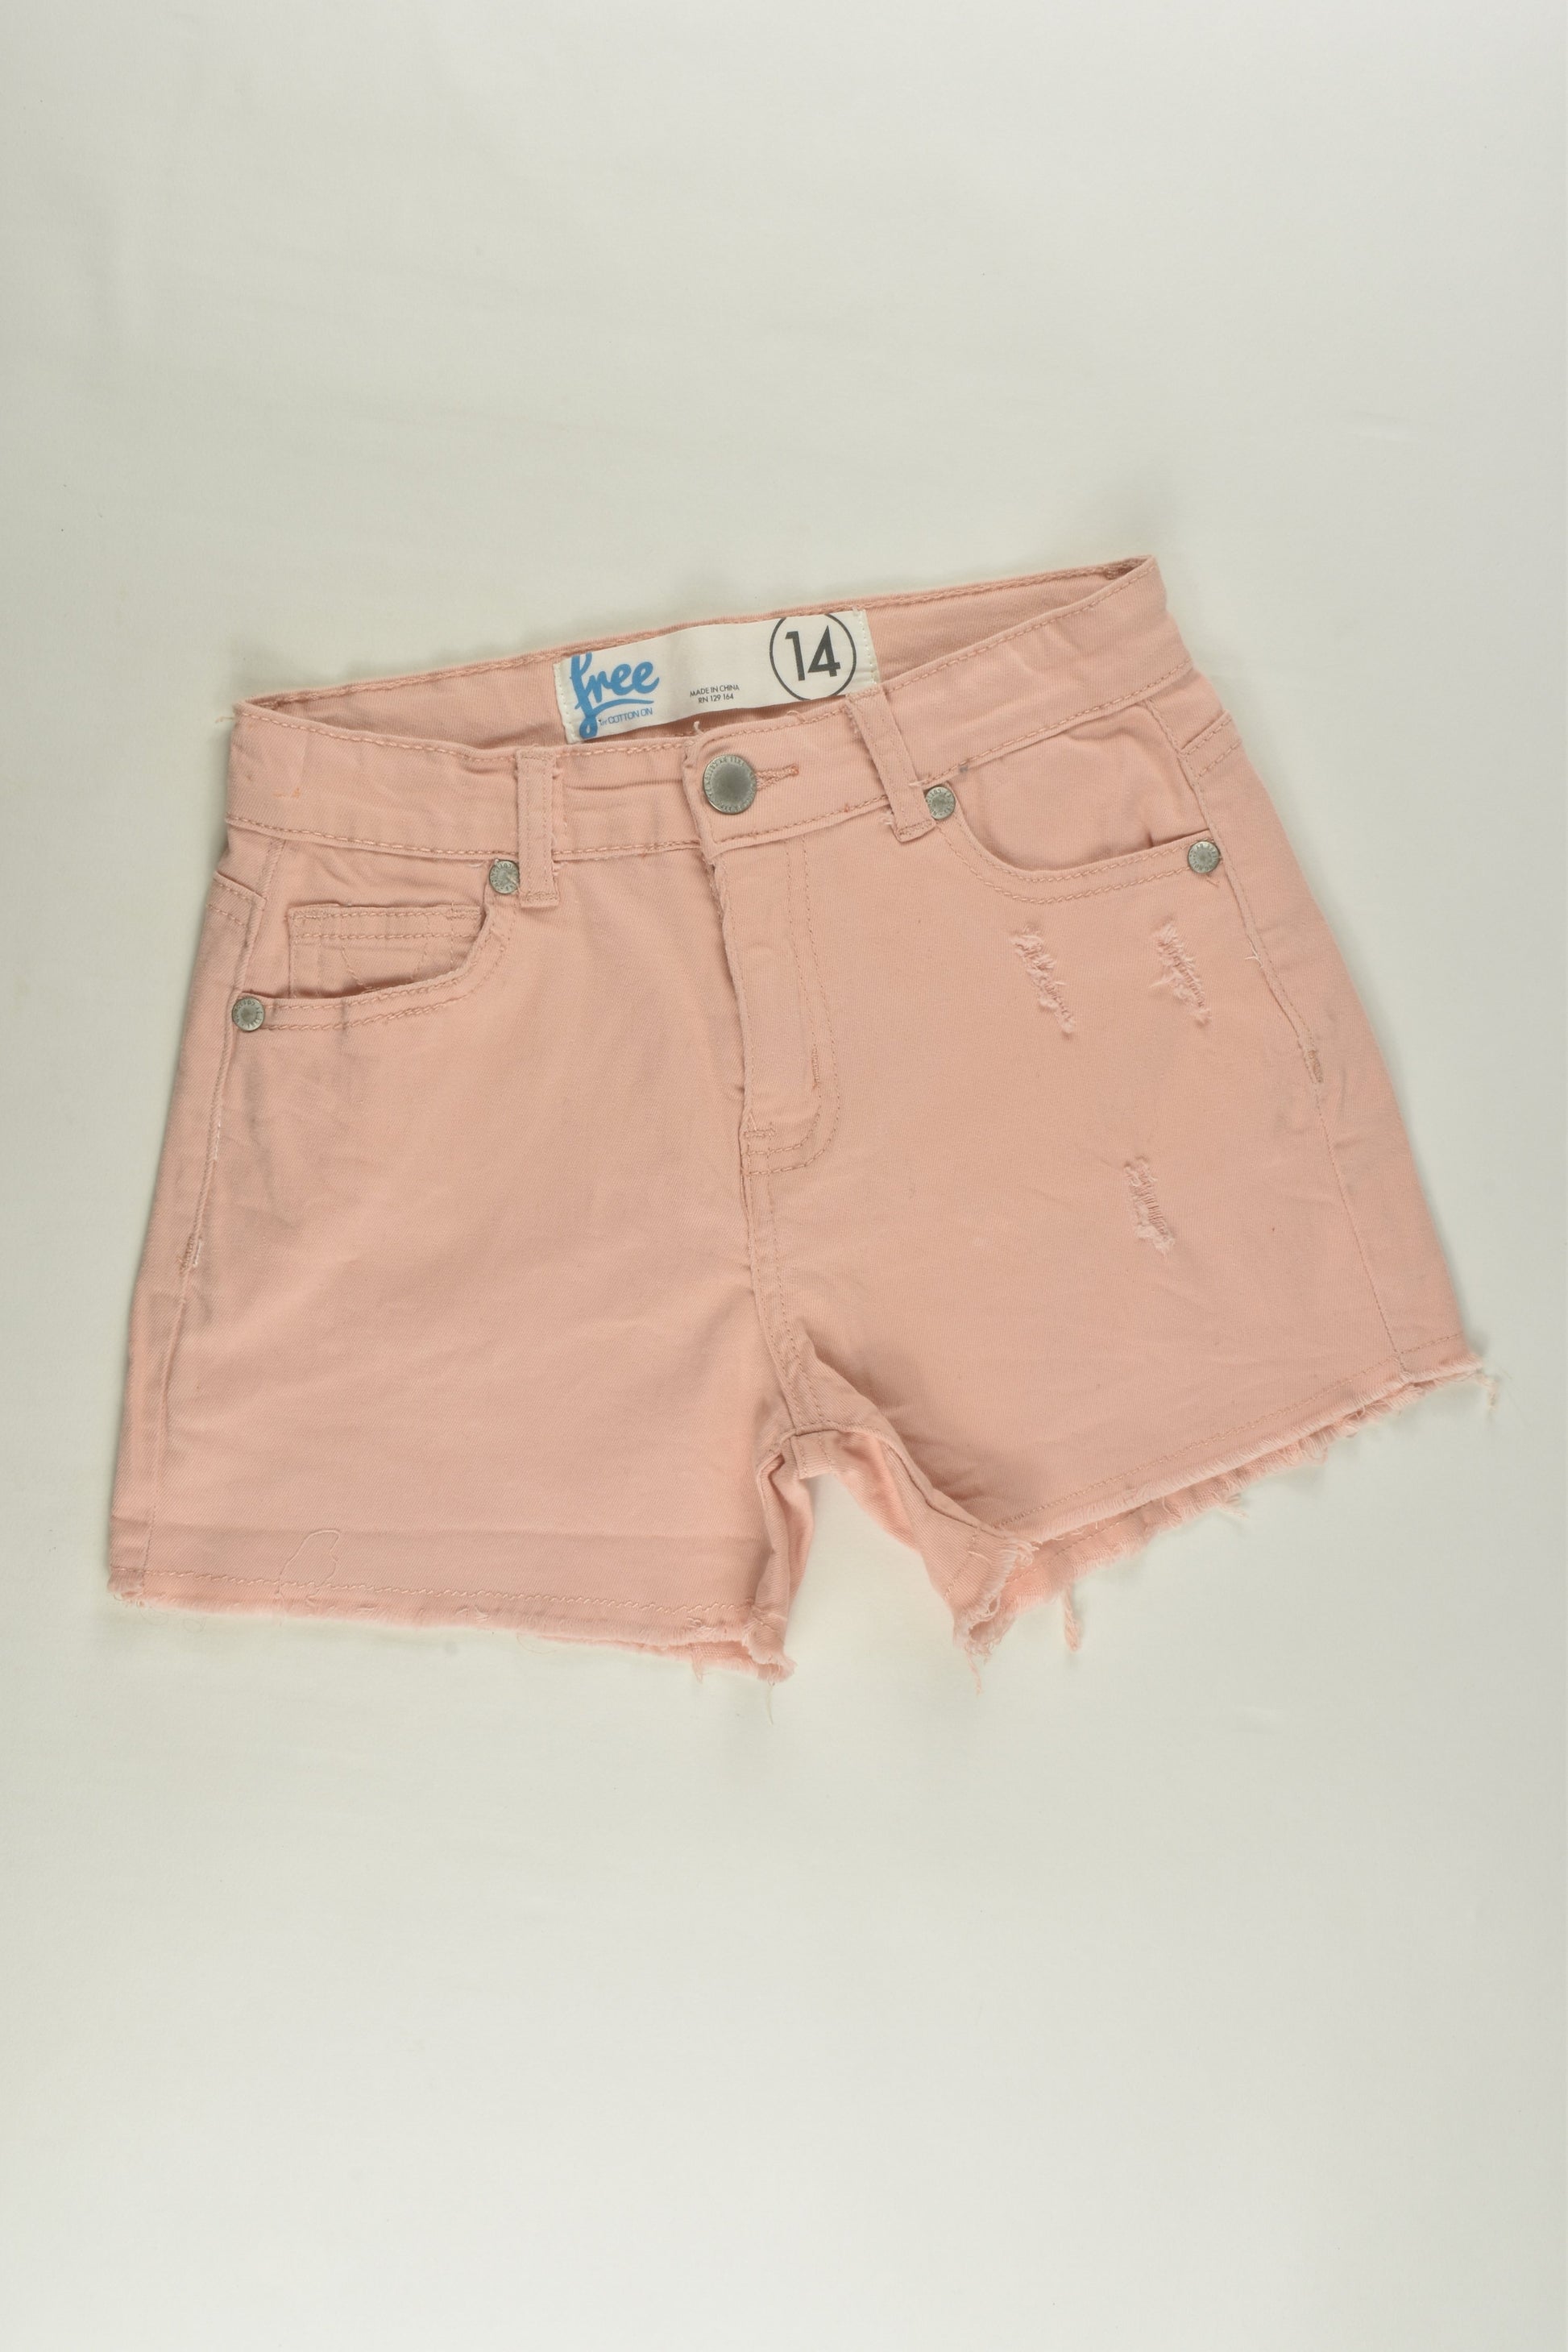 Free by Cotton On size 14 Stretchy Shorts